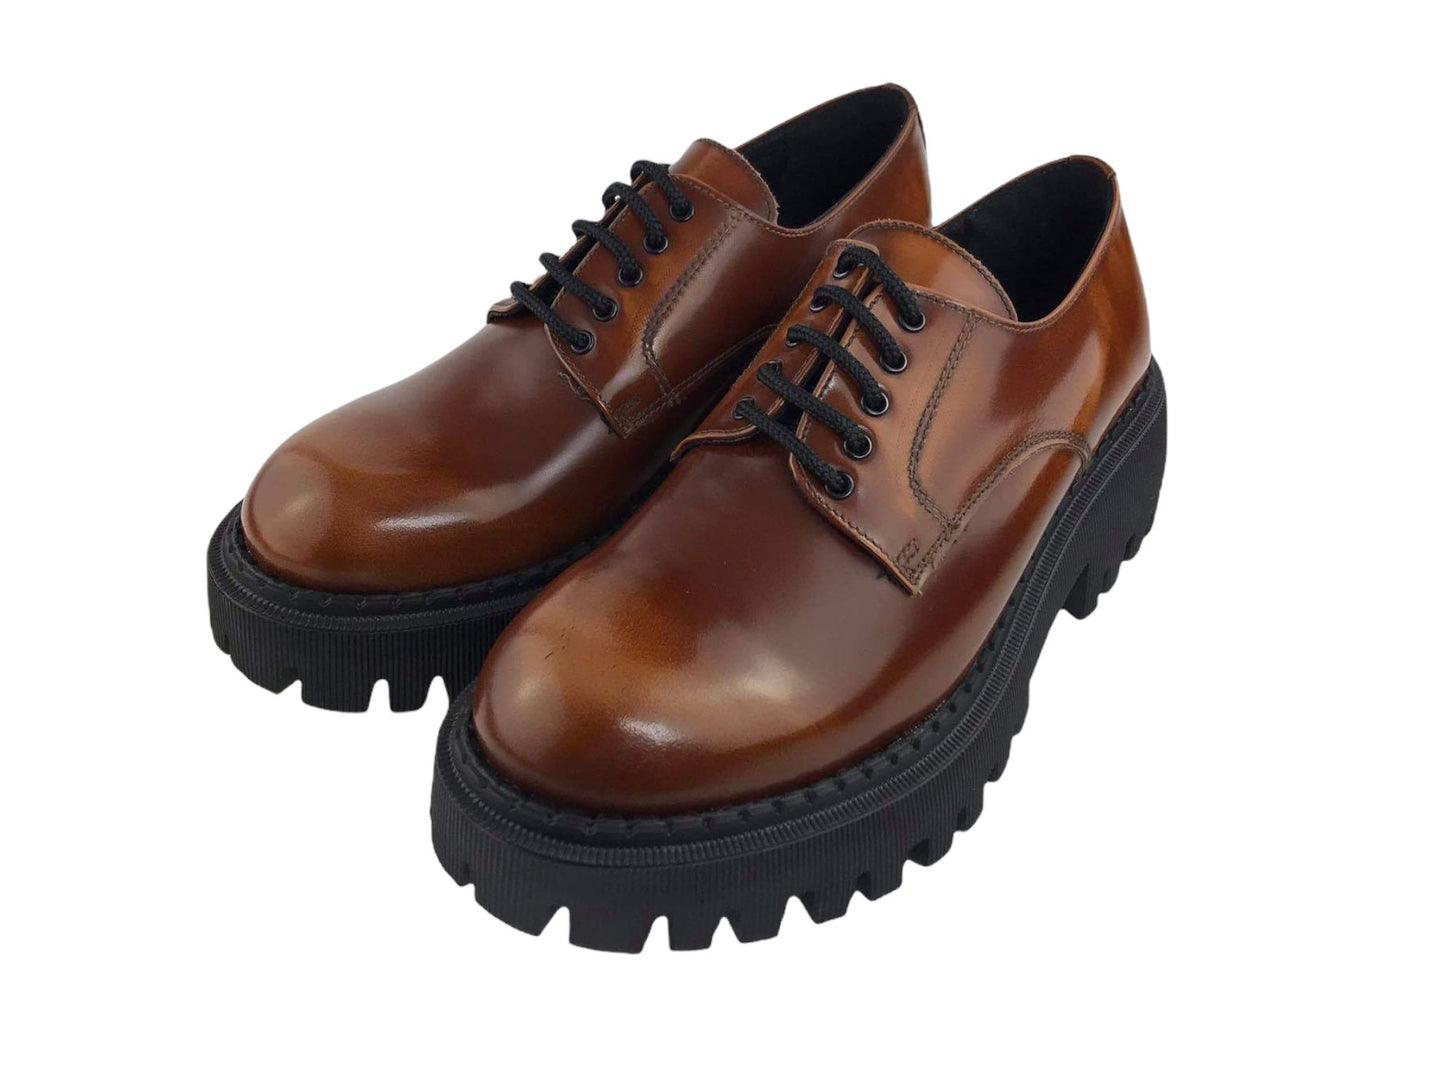 marnate | Women's Ambra Oxford style shoes with caramel color waxed leather laces